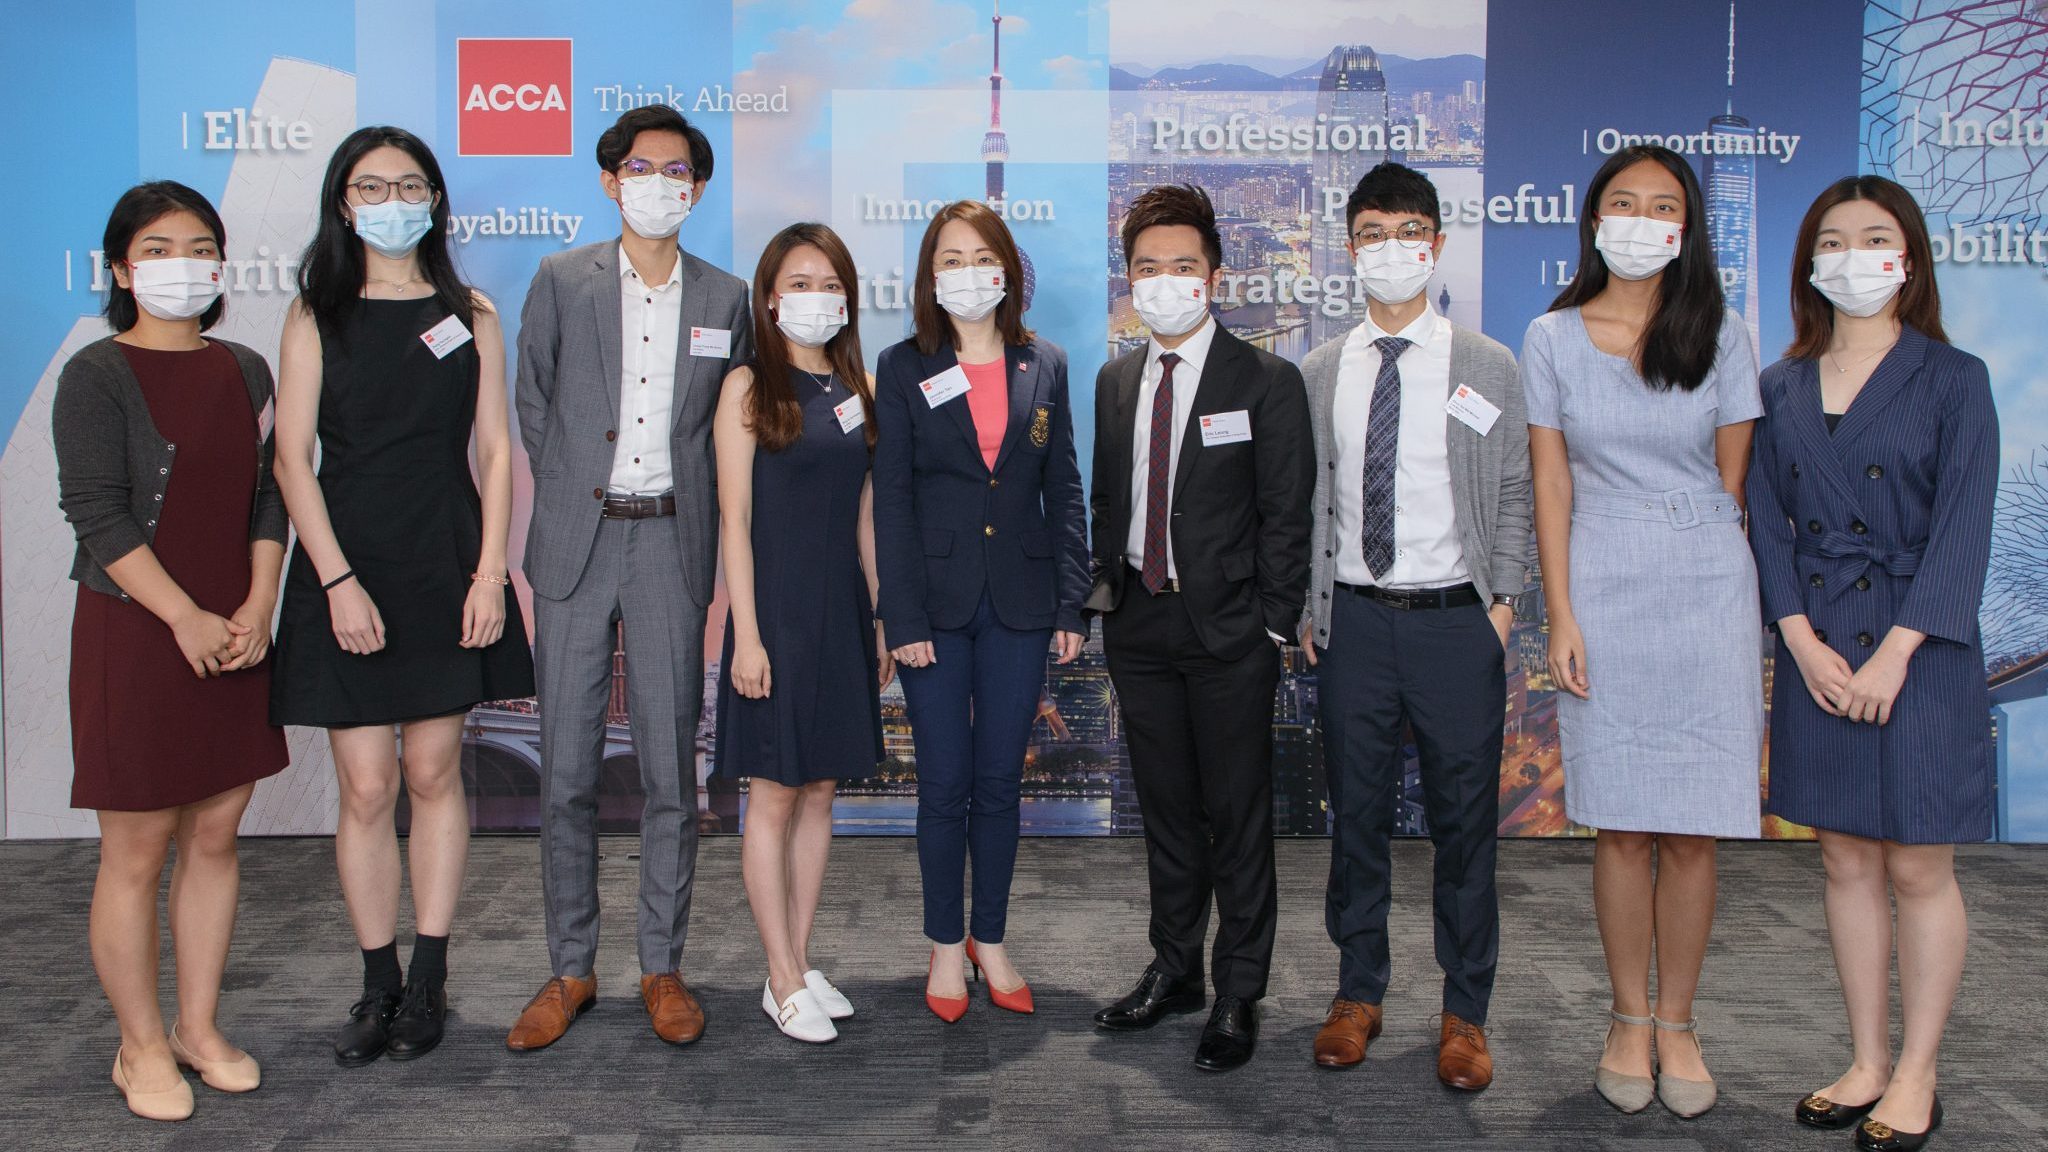 CUHK Alumni who achieved top results in ACCA exams